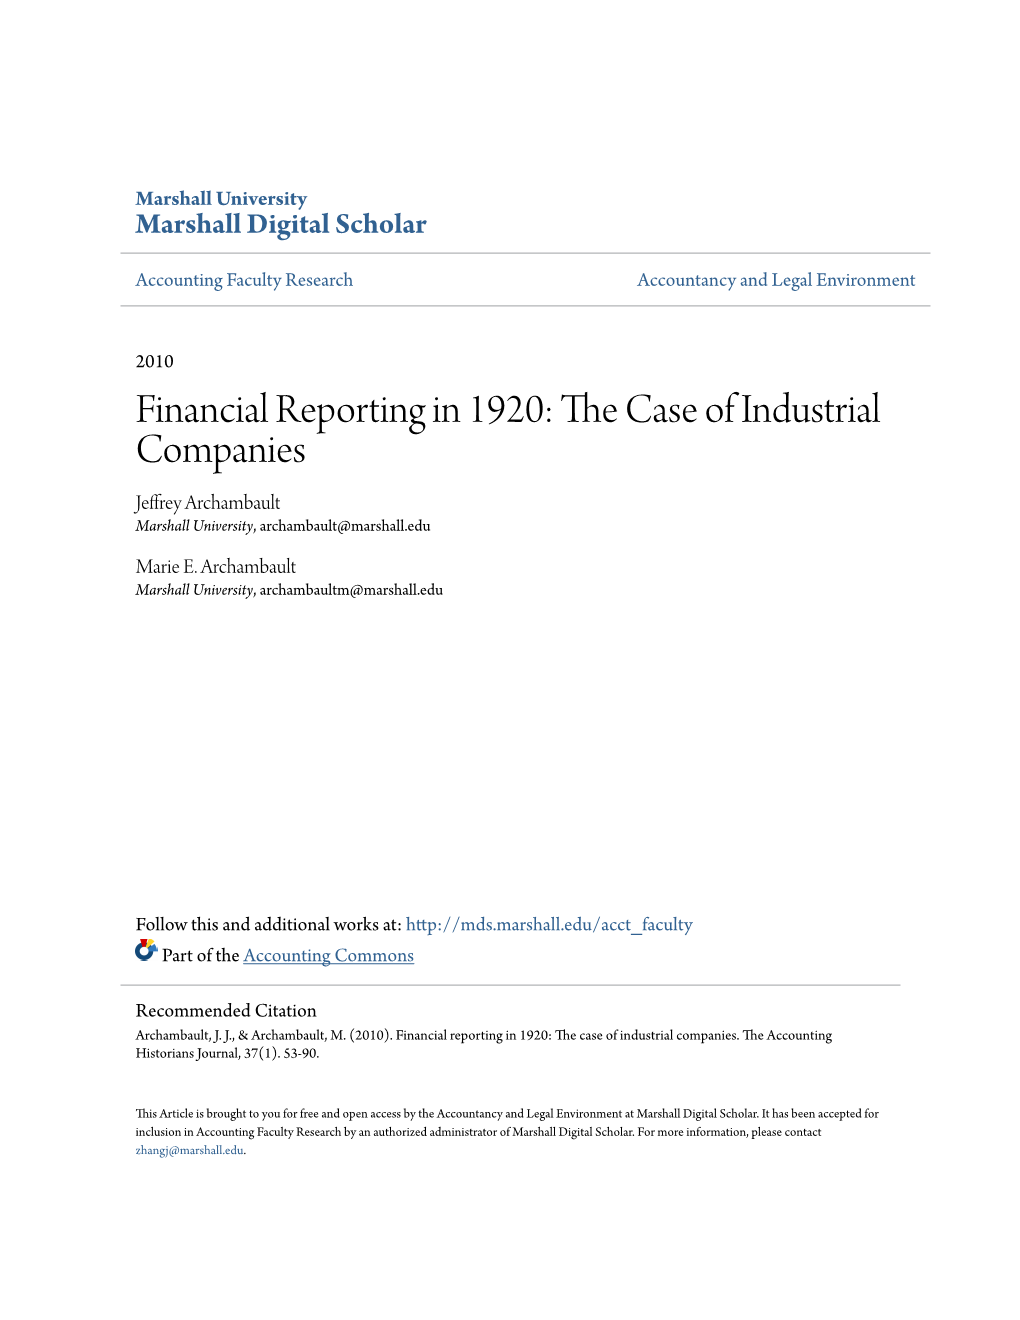 Financial Reporting in 1920: the Case of Industrial Companies